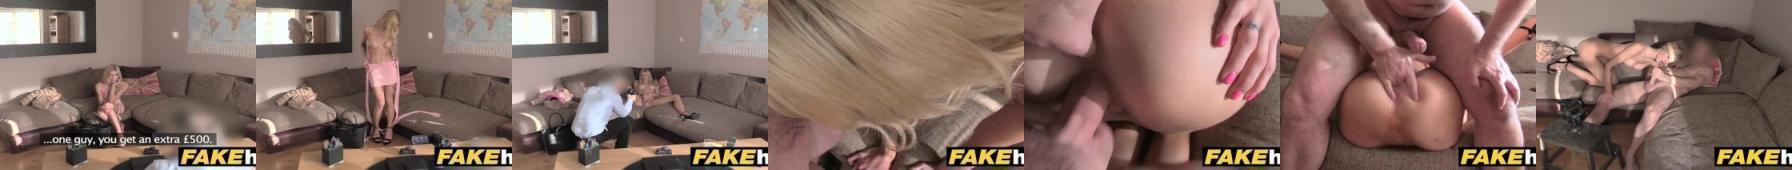 Fake Agent UK Blonde orgasms from hard finger banging on casting couch